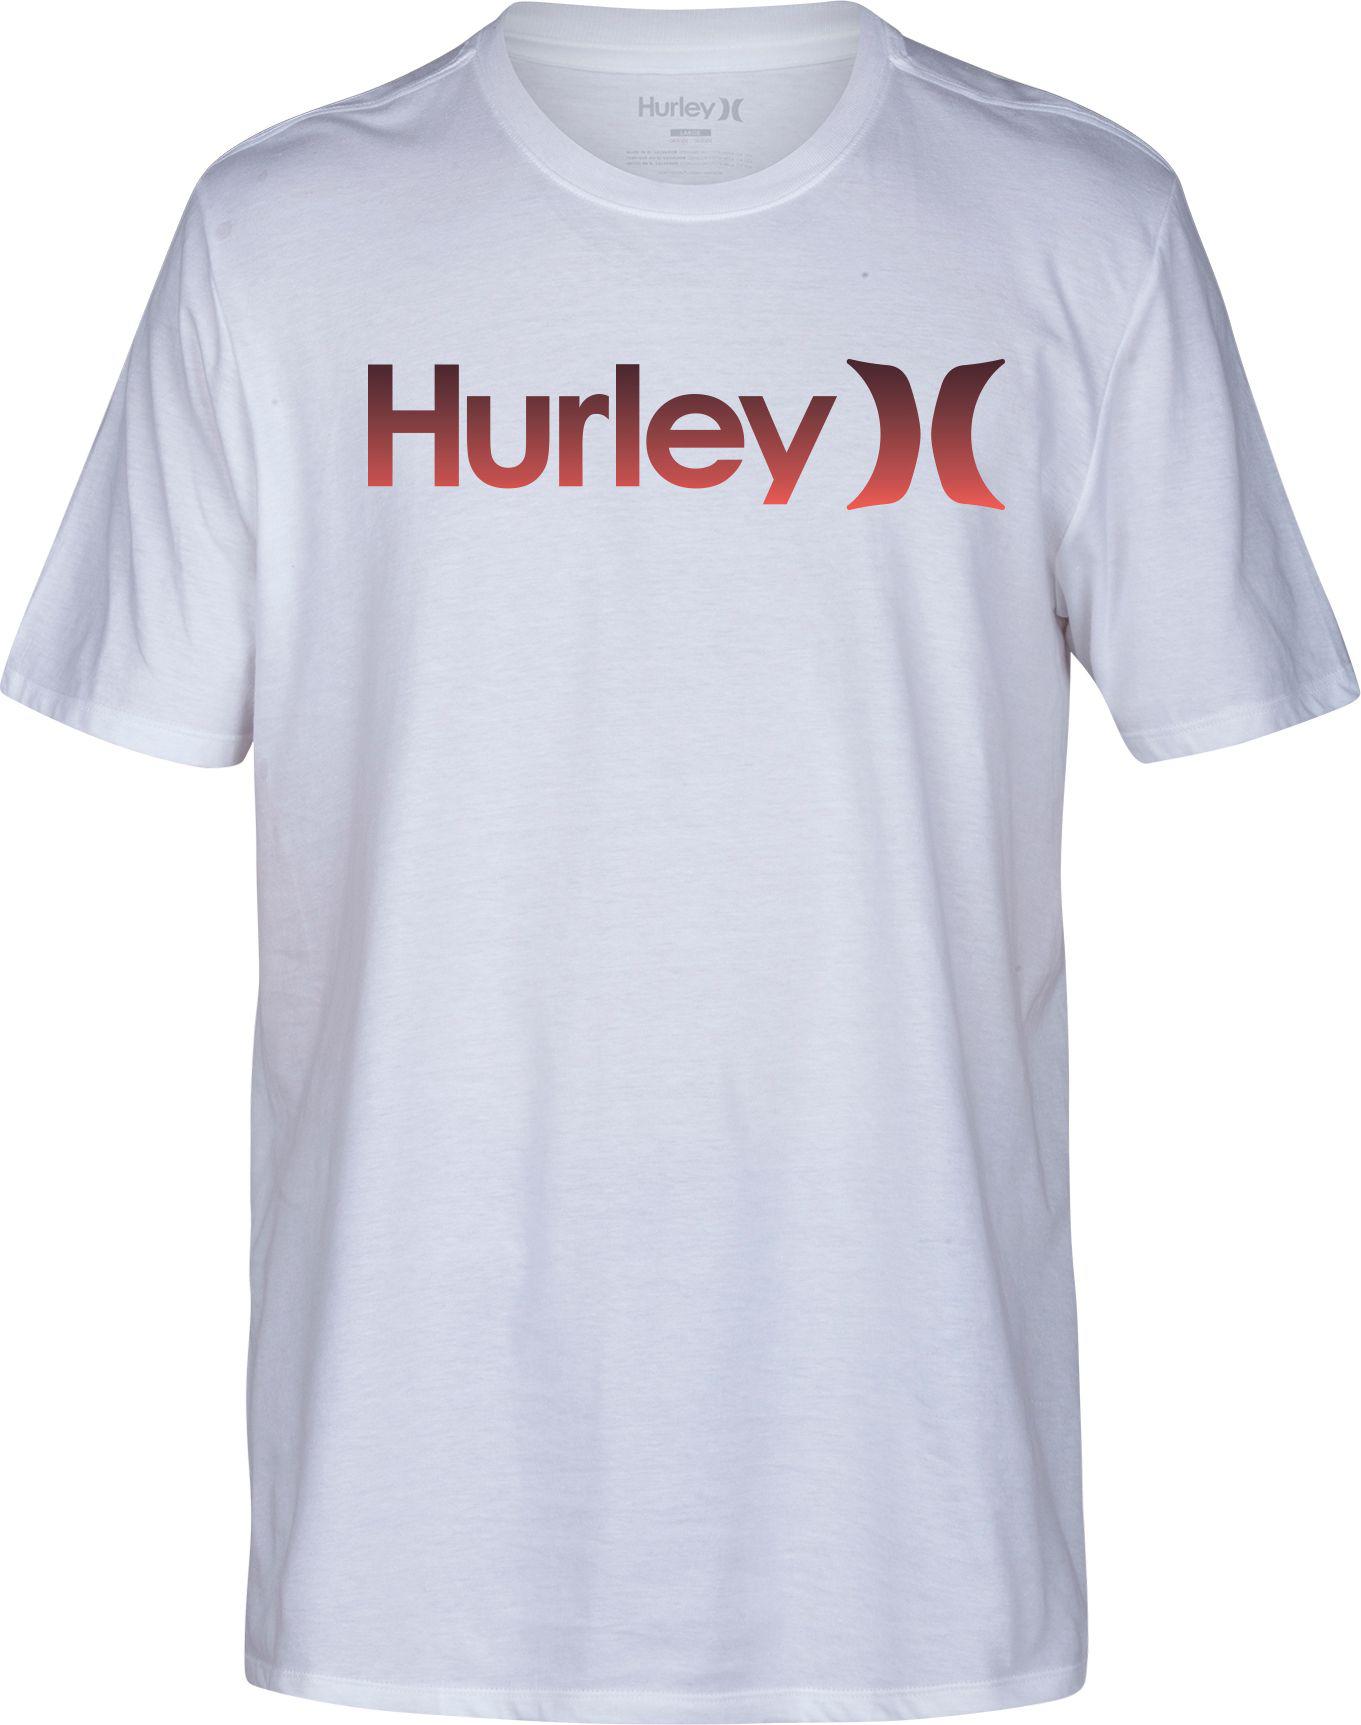 Lyst - Hurley One & Only Gradient T-shirt in White for Men